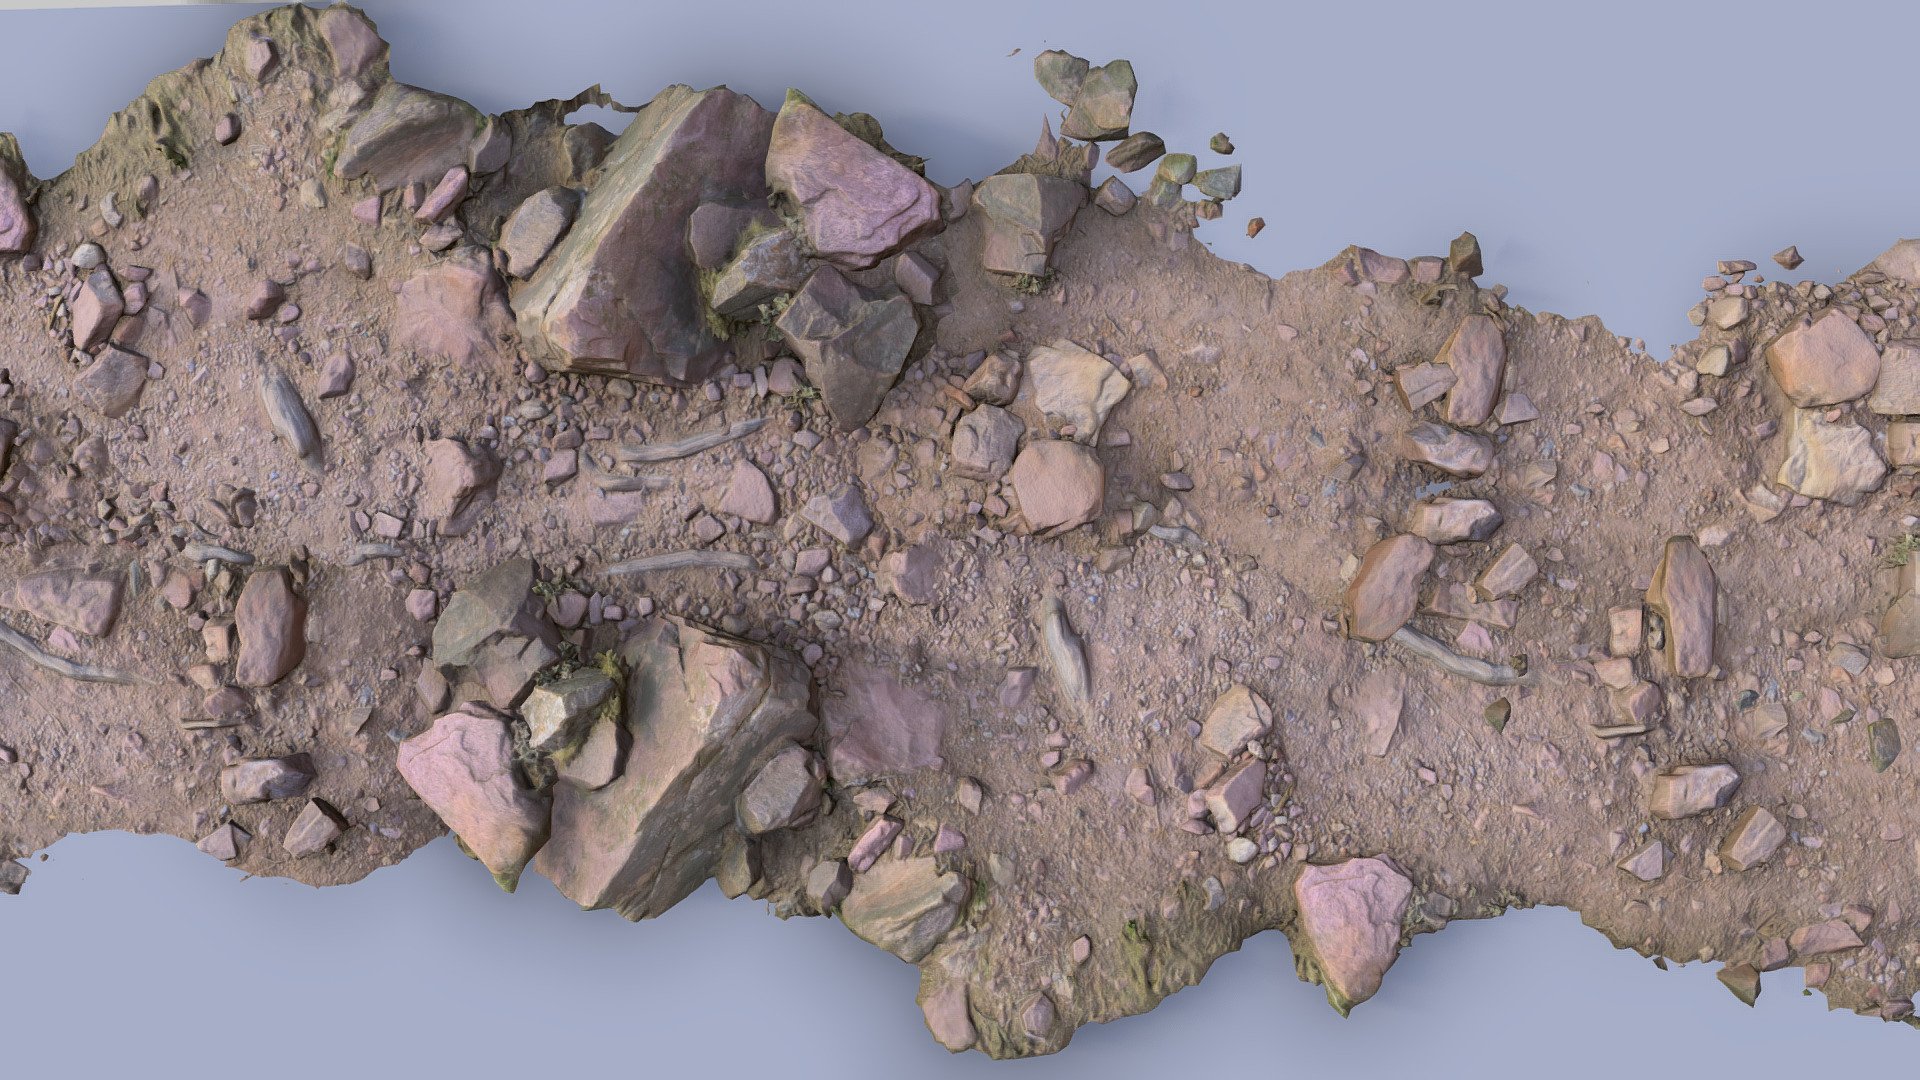 Fully processed 3D scans: no light information, color-matched, etc. 

Ready to use for all kind of CGI

4K Textures:



normal



albedo



roughness



Please let me know if something isn’t working as it should.

realistic Rocky Stone Path Scan - Rocky Stone Path Scan - Download Free 3D model by Per's Scan Collection (@perz_scans) 3d model